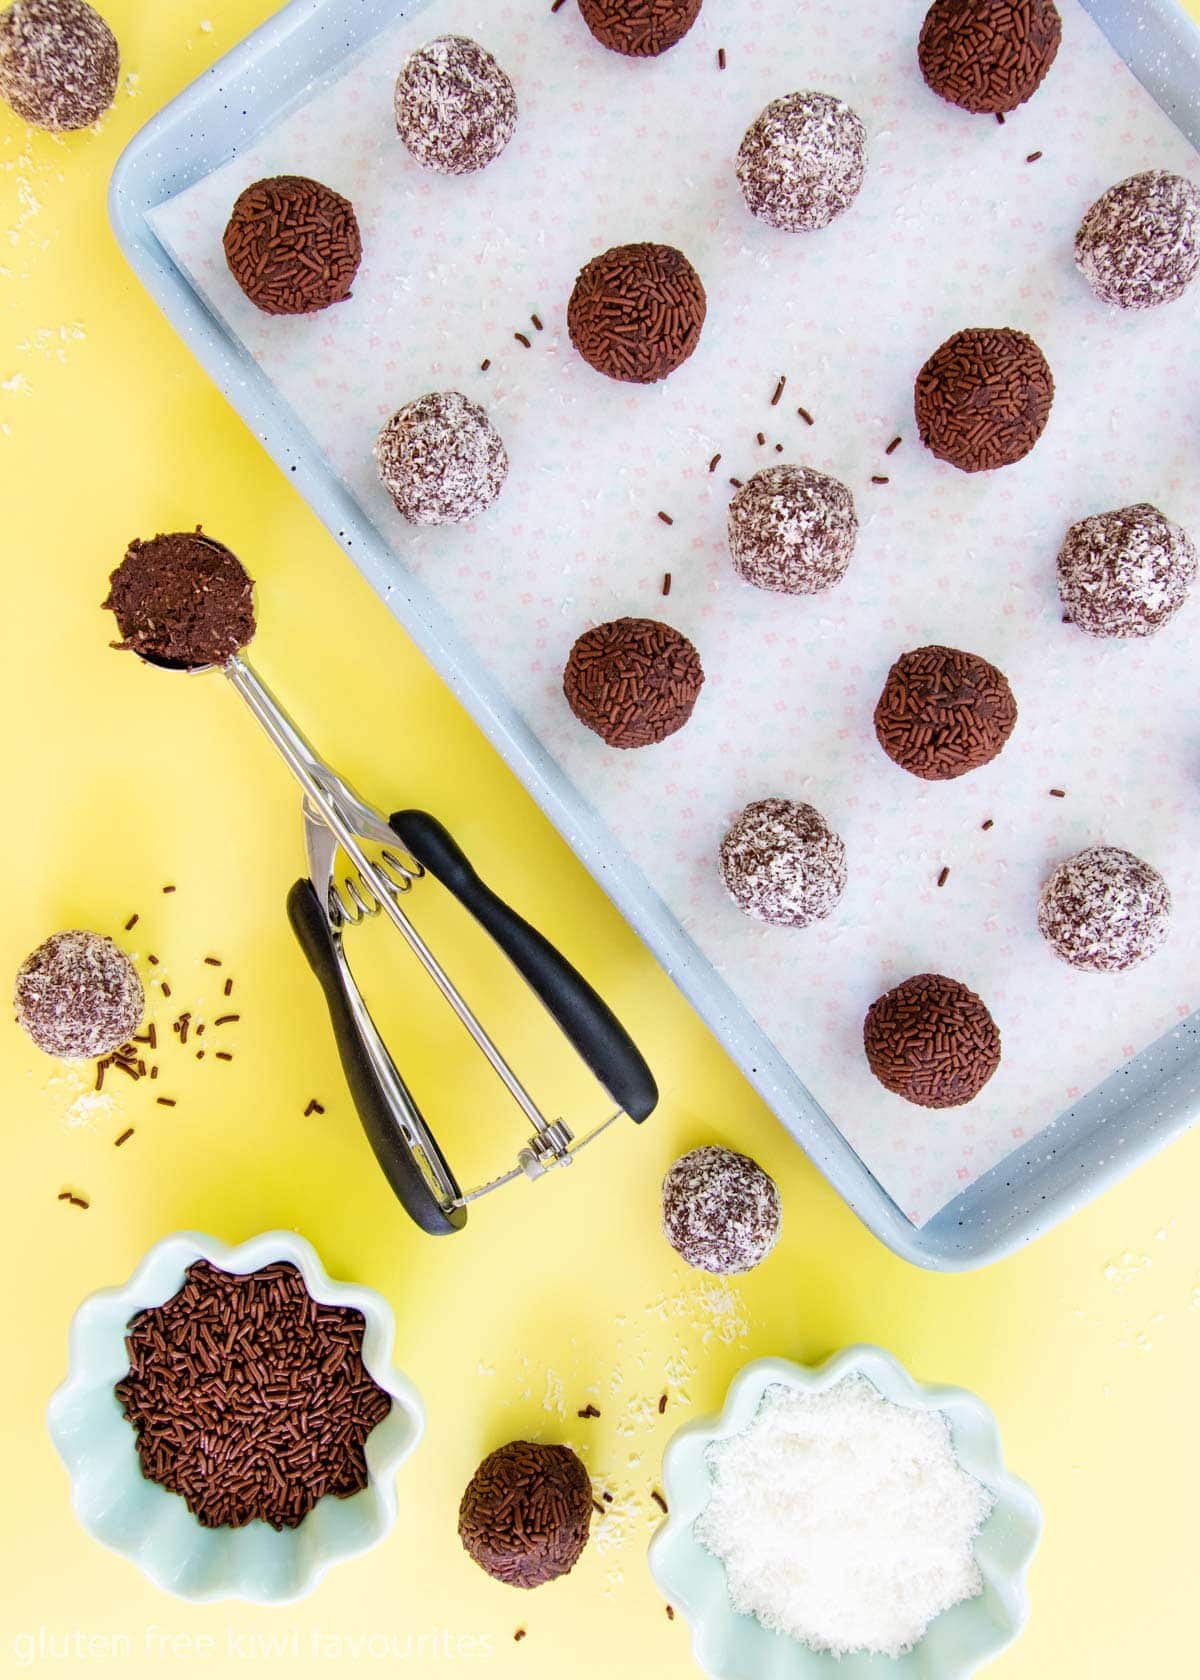 Rum balls being rolled in coconut and chocolate sprinkles.